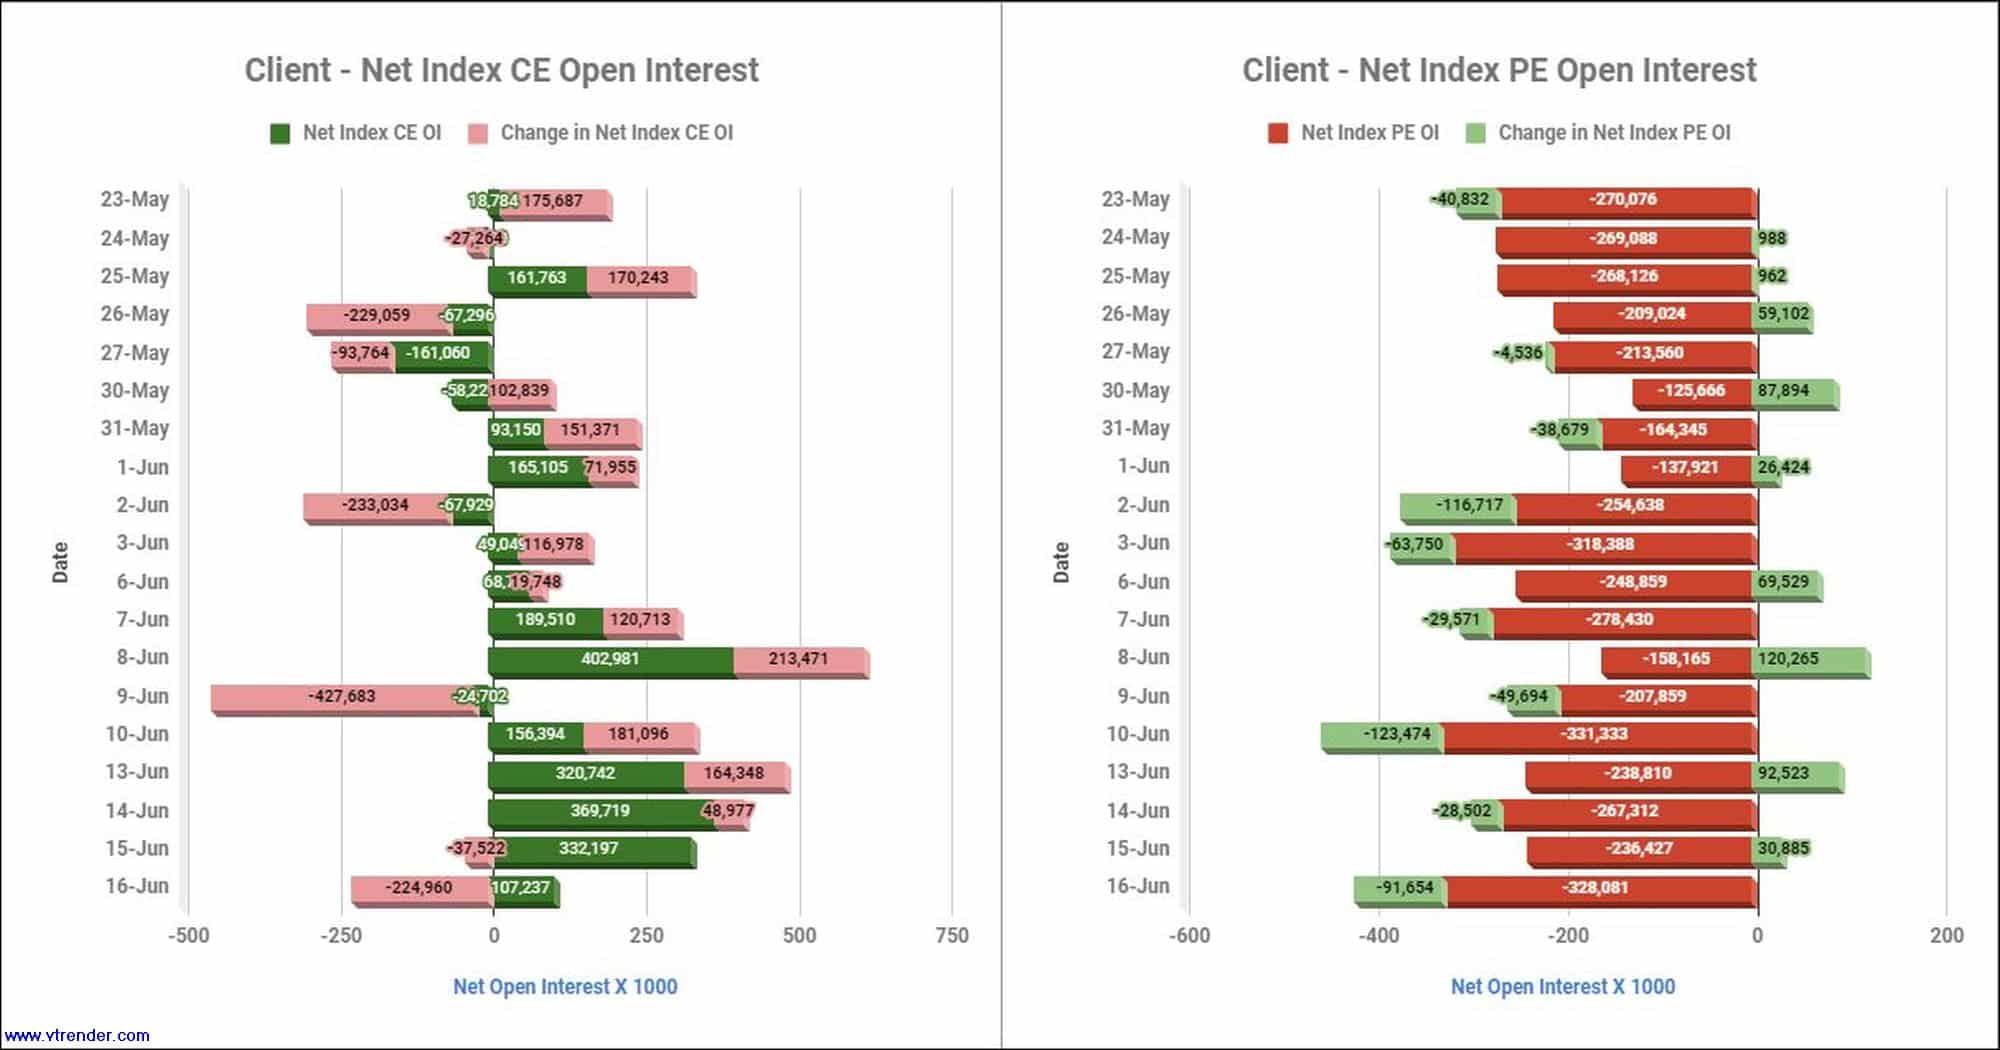 Clientinop16Jun Participantwise Net Open Interest And Net Equity Investments – 16Th Jun 2022 Client, Equity, Fii, Index Futures, Index Options, Open Interest, Prop